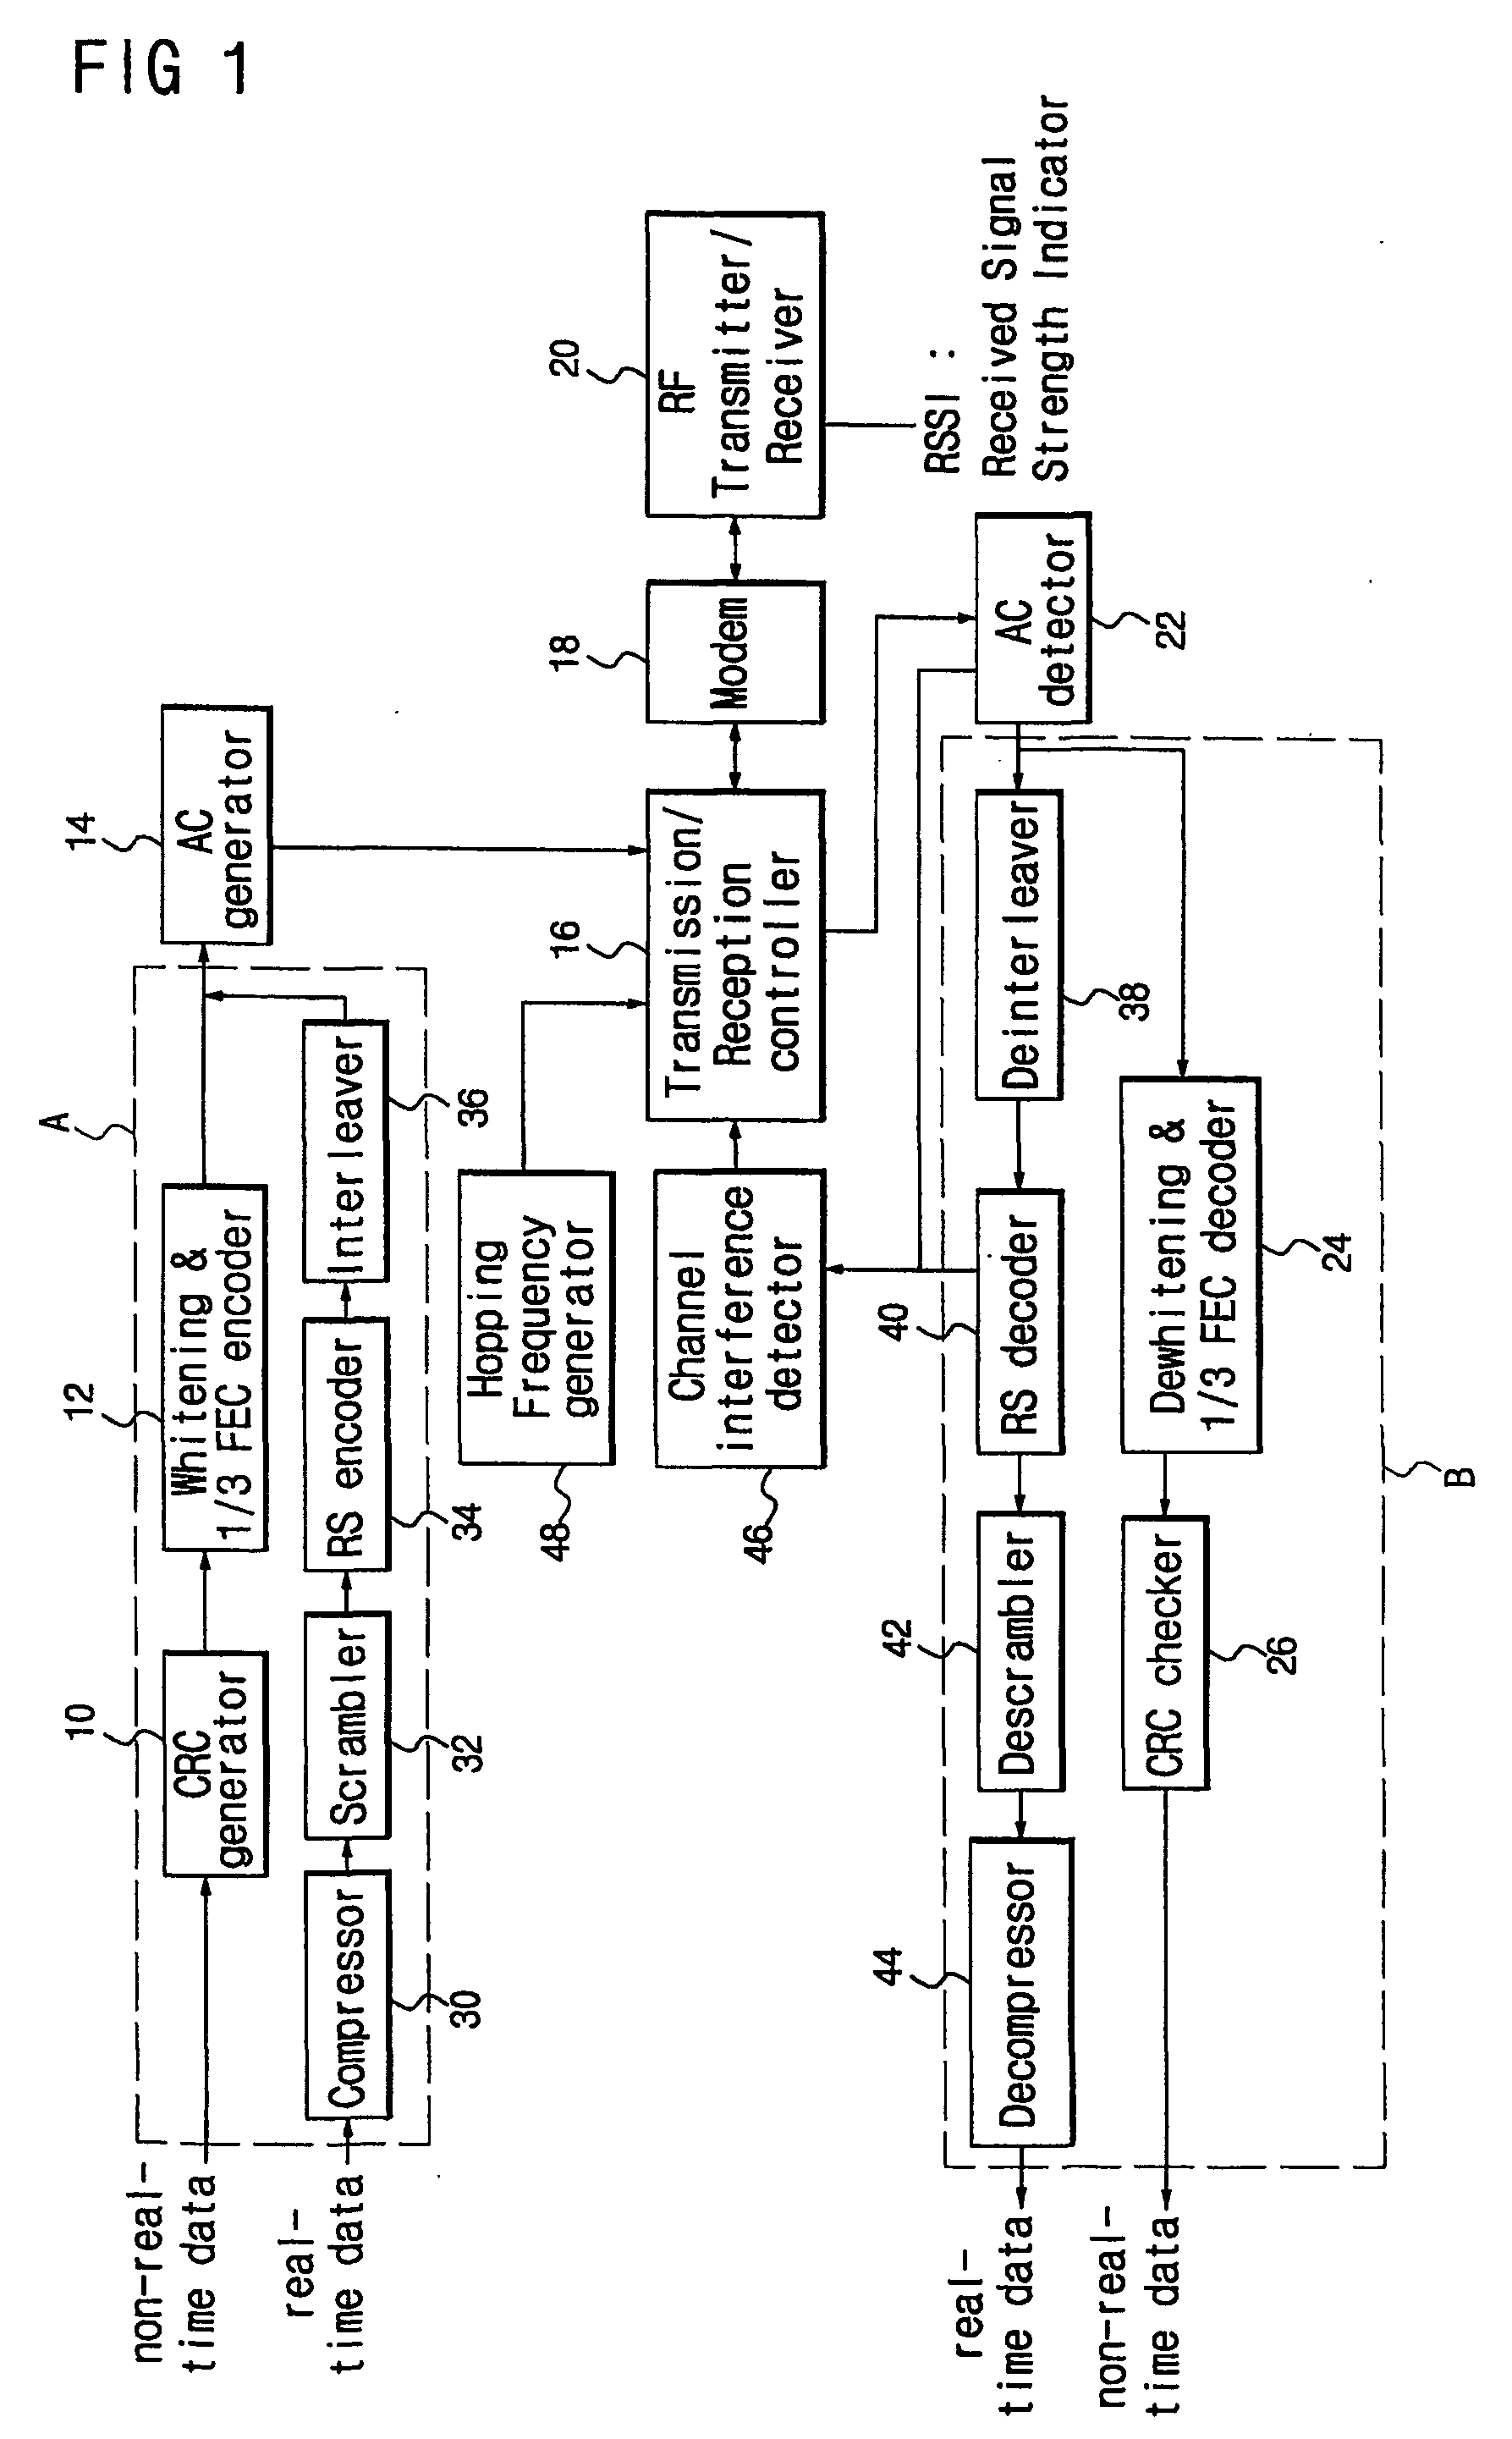 Apparatus and method for transmitting wireless data using an adaptive frequency selection